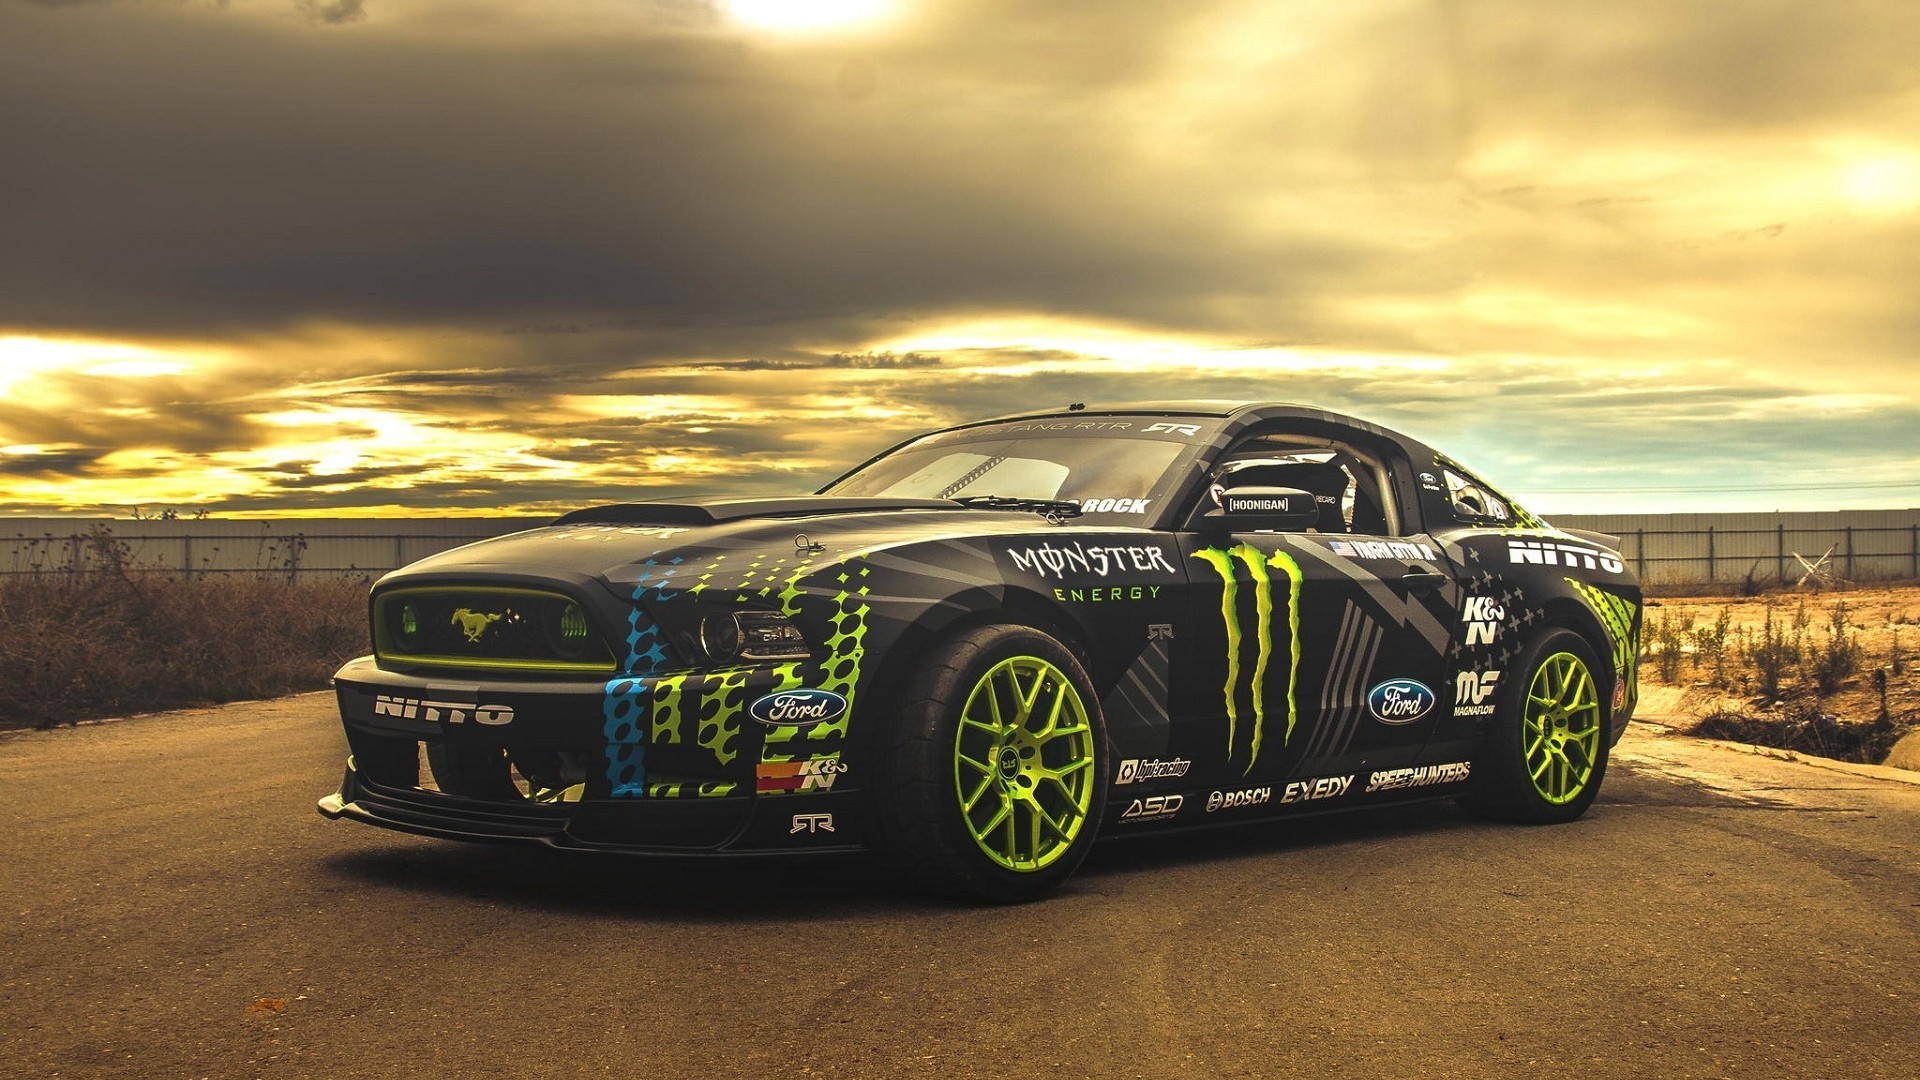 Ford Mustang Hoonigan Monster Energy Colored Wheels 1920x1080